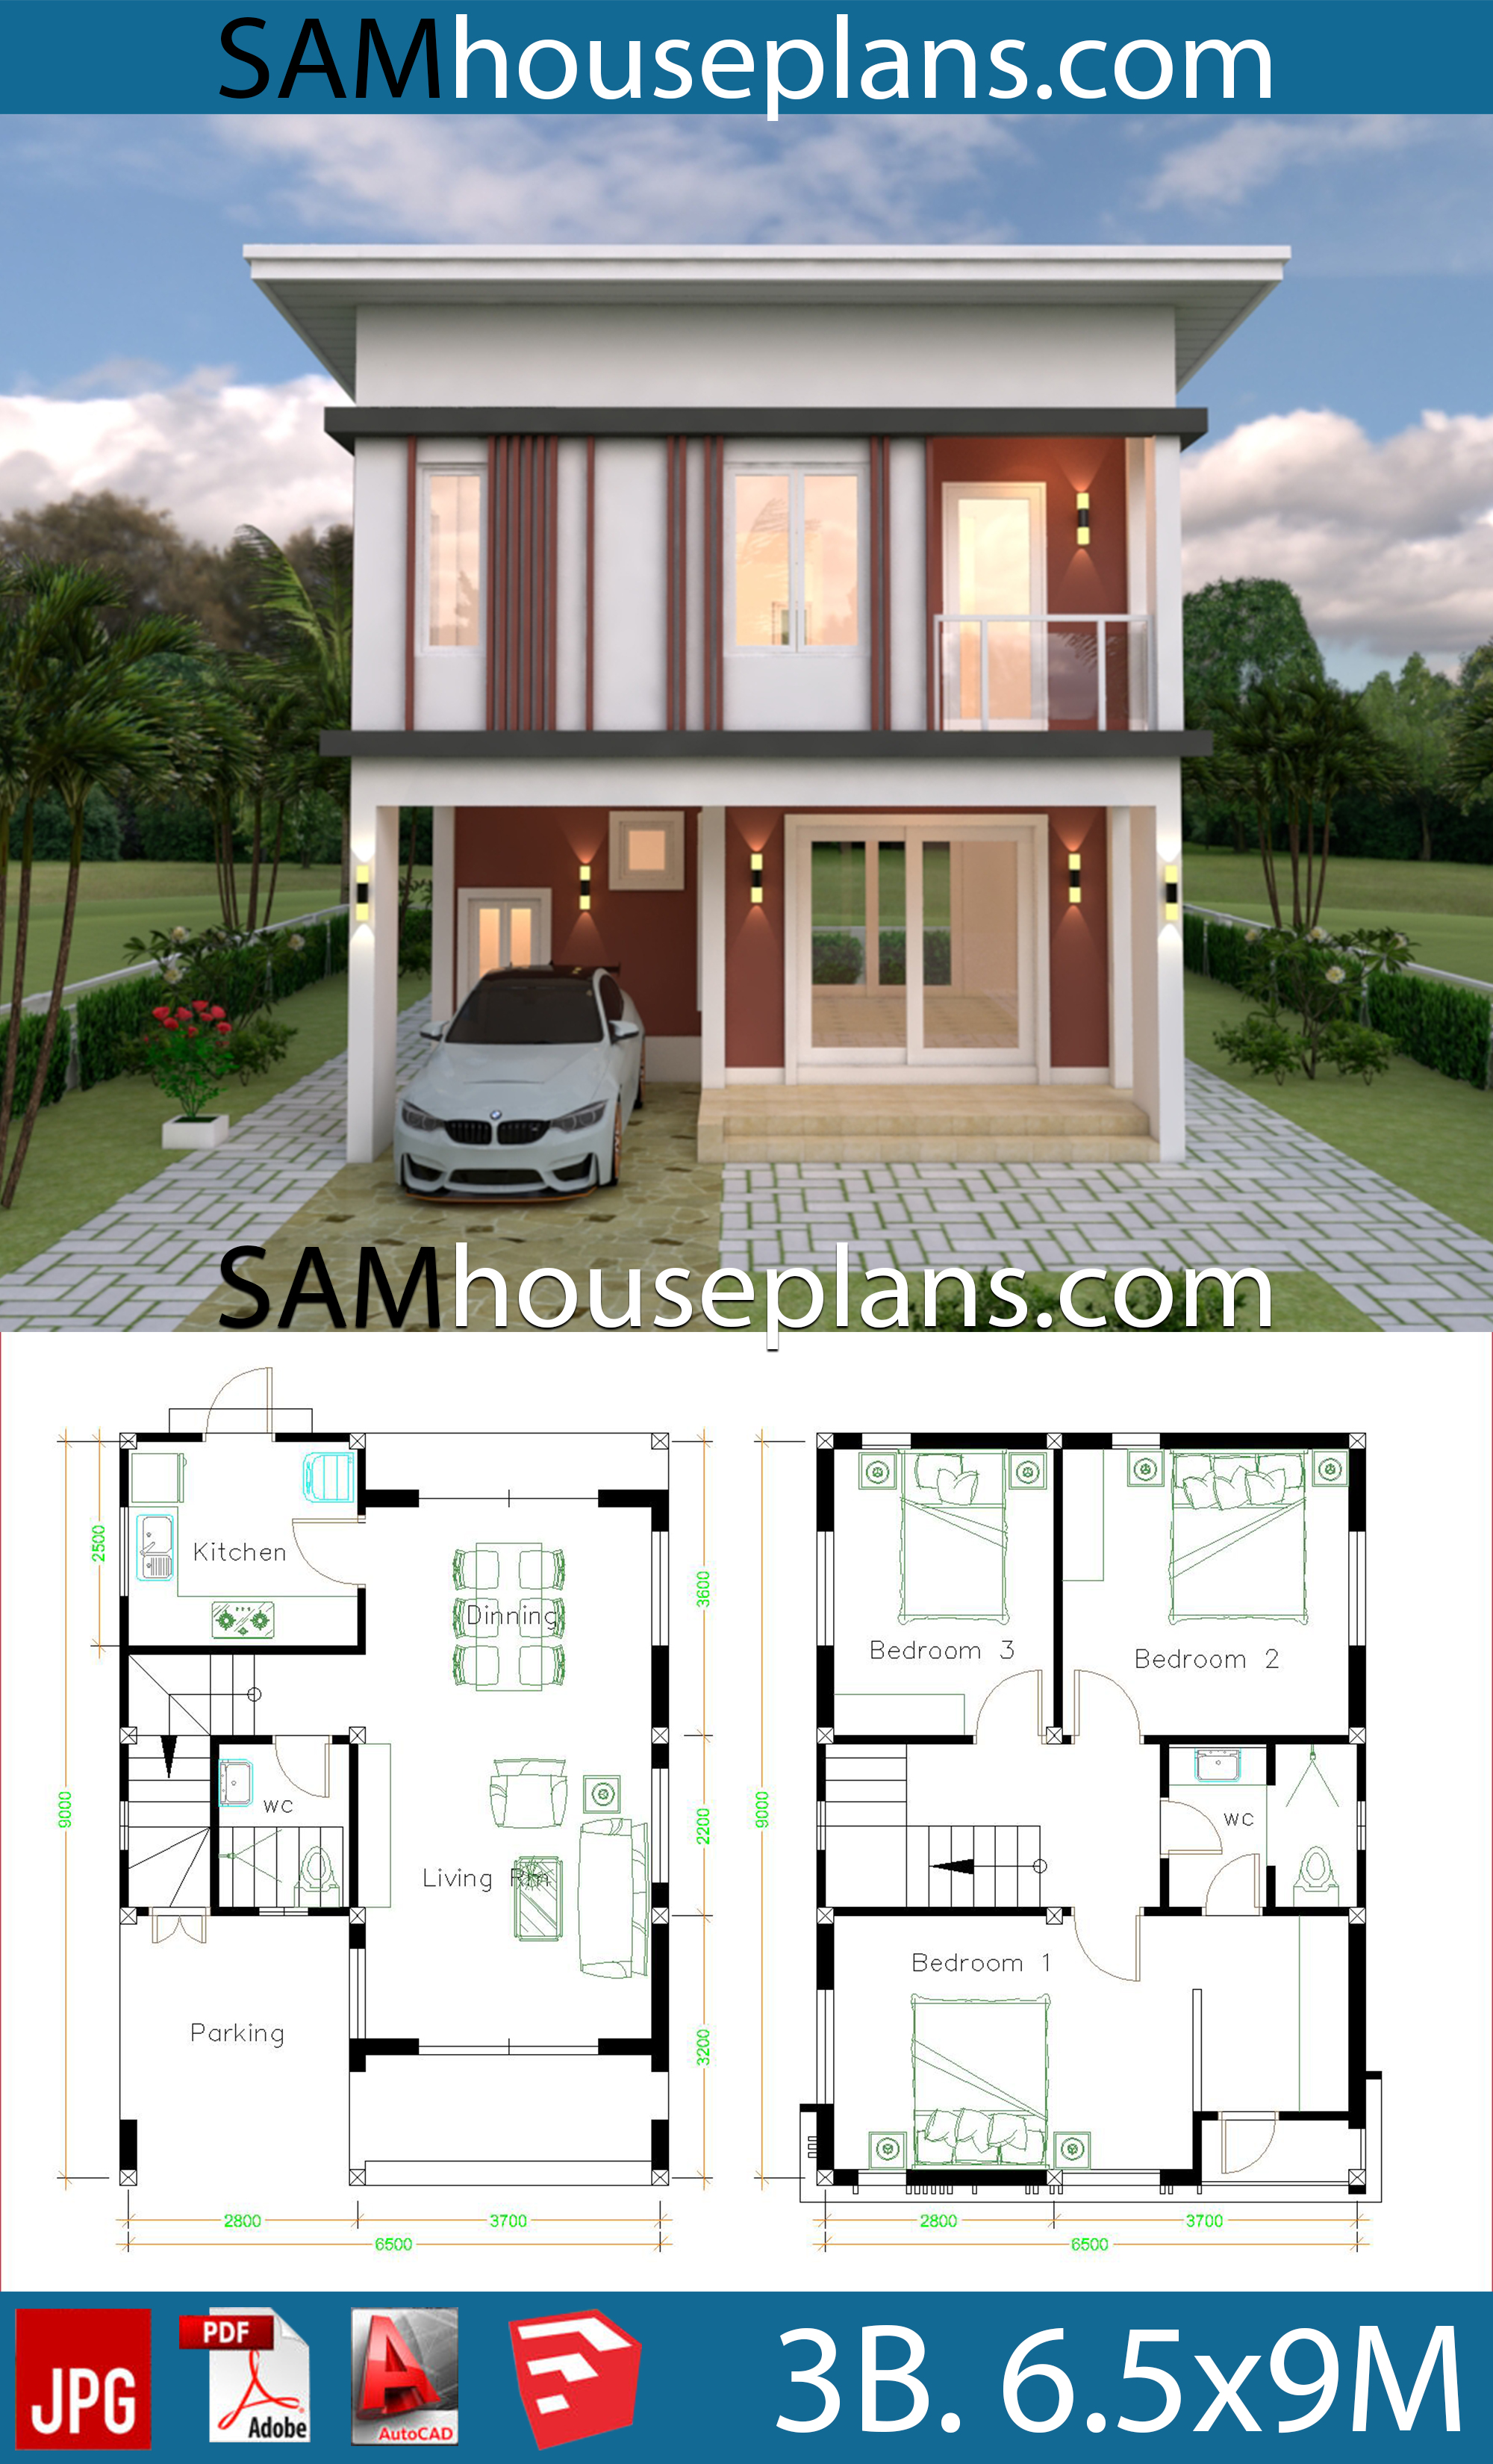 3 Bedroom Flat Roof House Designs / We give you all the files, so you